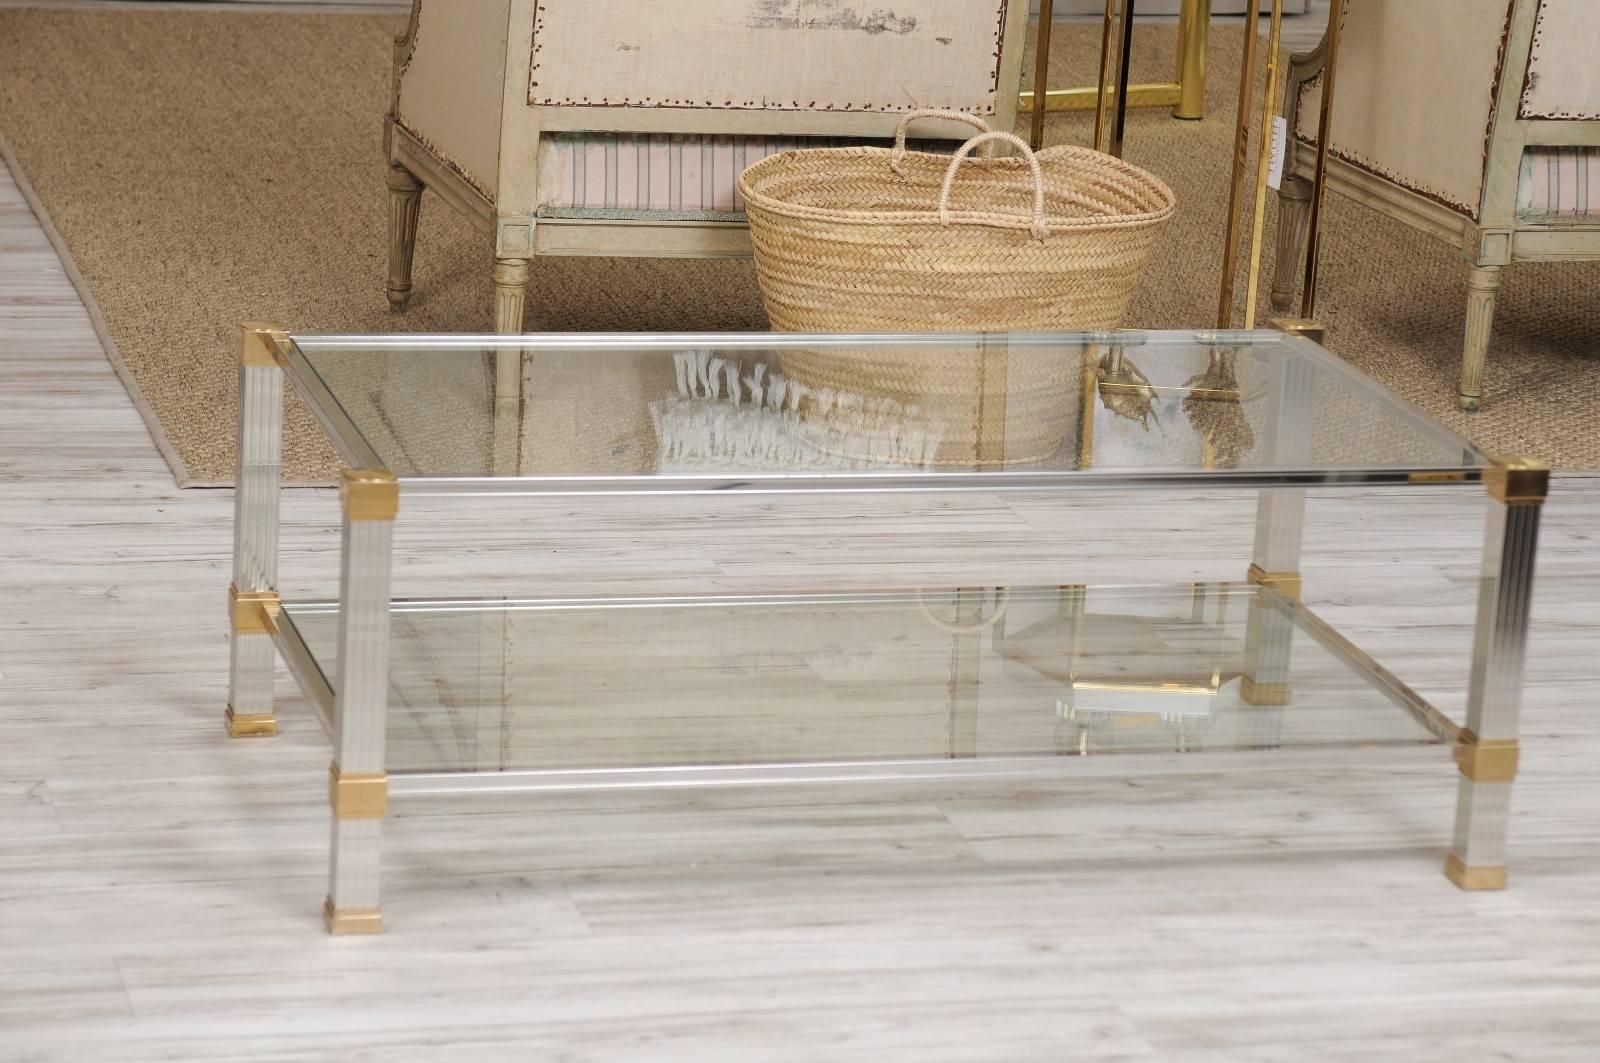 A French Mid-Century Modern brass and chrome coffee table signed Pierre Vandel with linear profile, glass top and lower shelf. The rectangular top and shelf are nicely secured by four reeded chrome legs with brass accents. We’re huge fans of